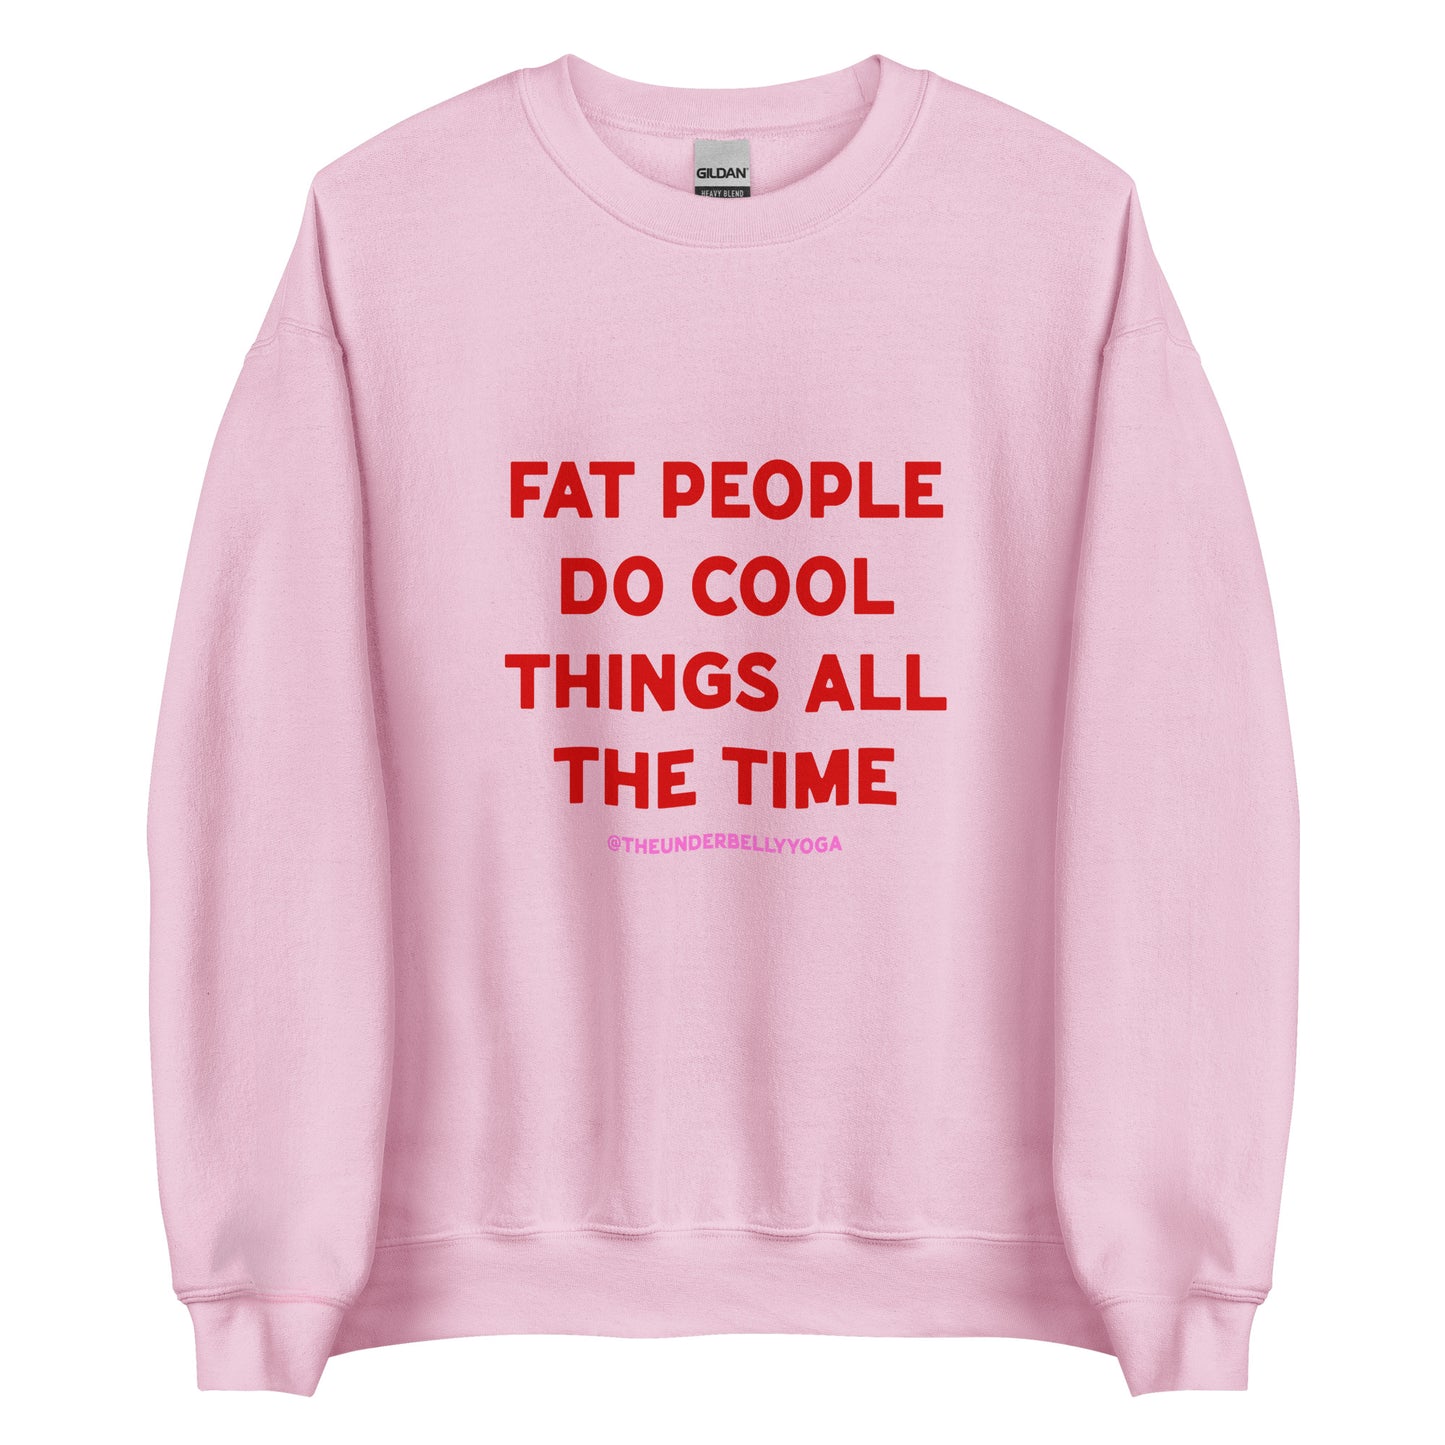 Fat People Do Cool Things All The Time Sweatshirt